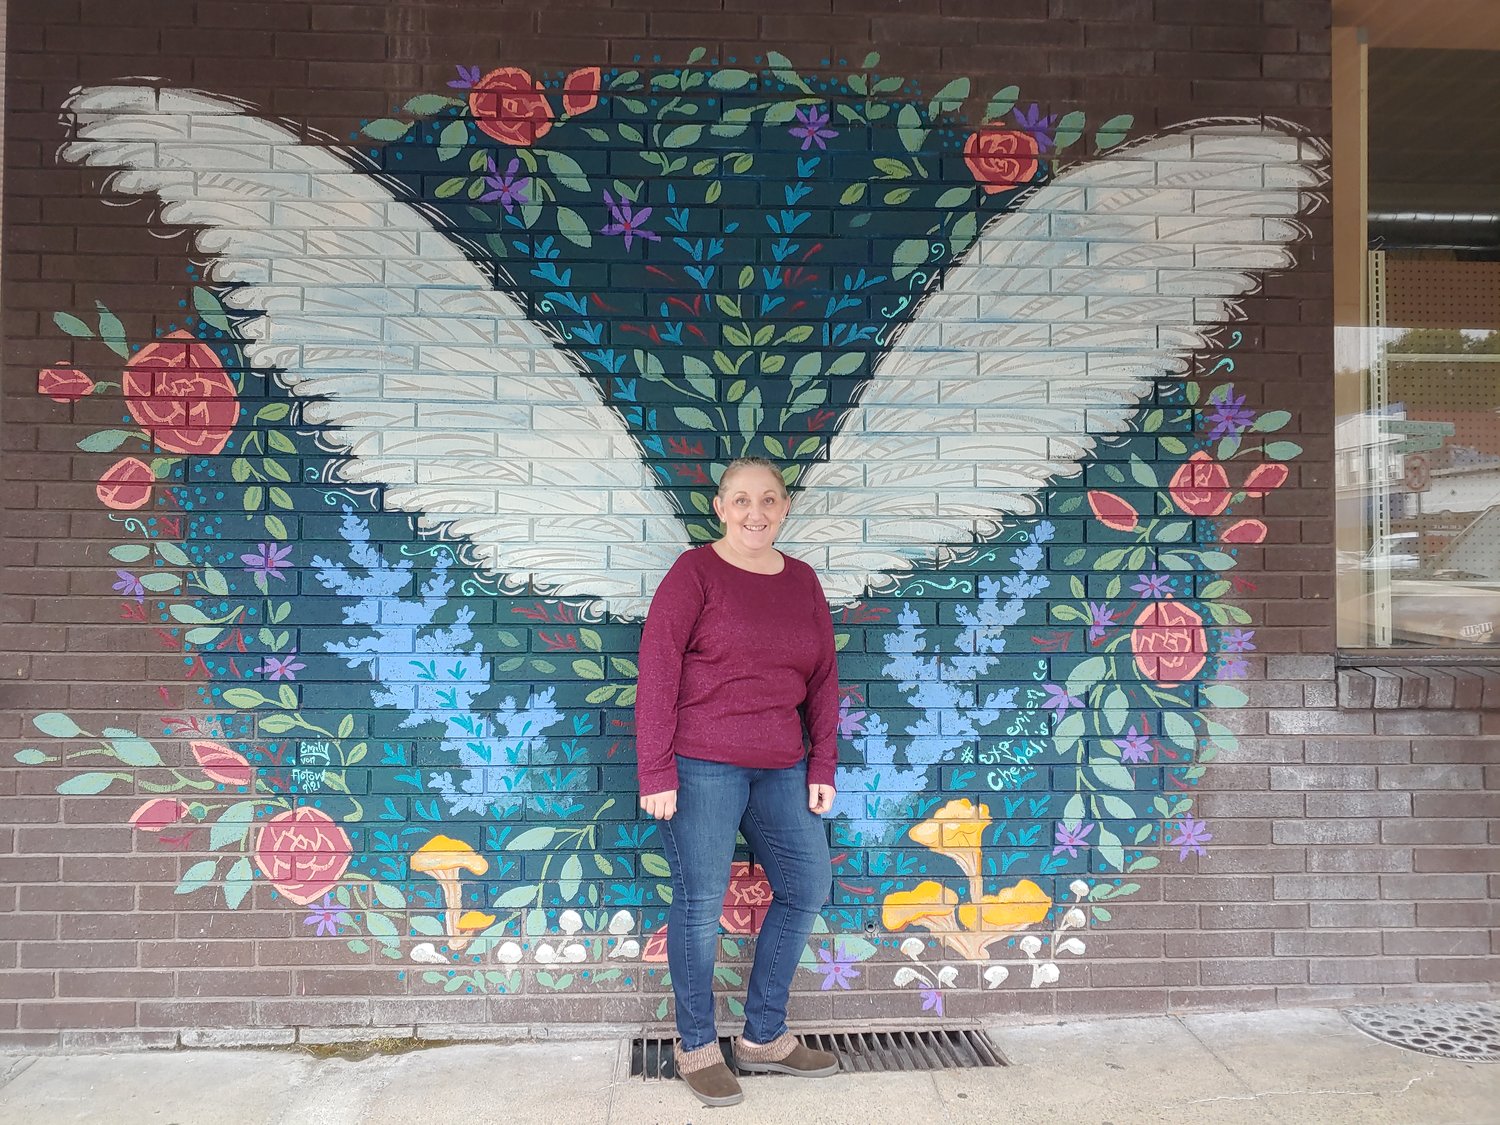 Sharon Eastman, a 30-year employee of Spiffy’s Restaurant & Bakery who now works at M&K Town Store and Sweet Inspirations, poses for a photo in front of a mural.